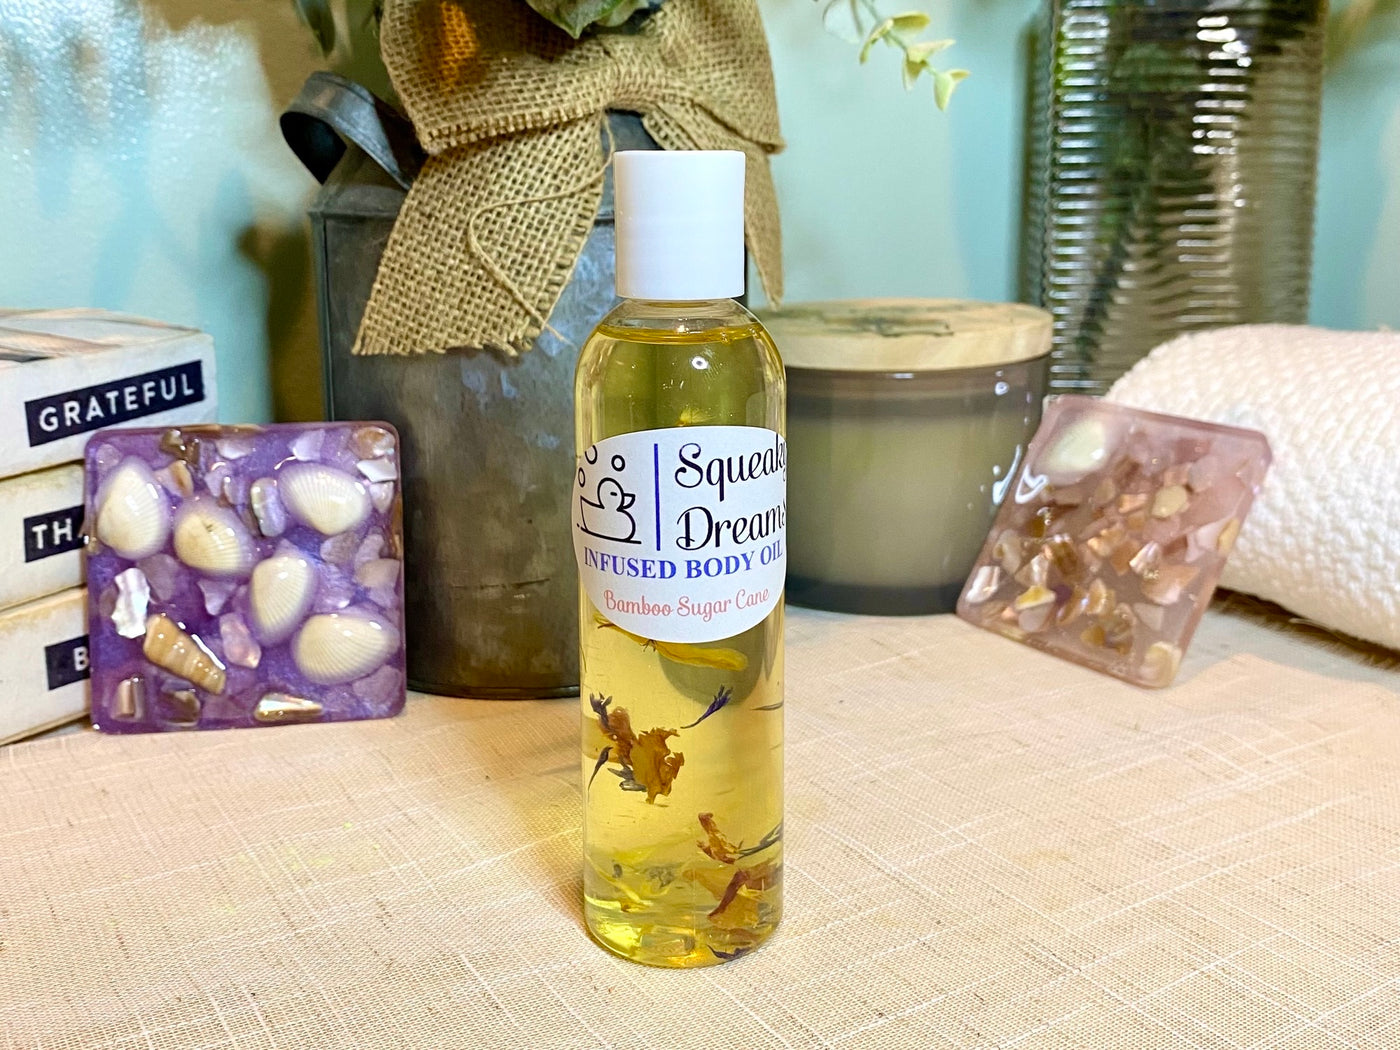 Bamboo Sugar Cane Infused Body Oil